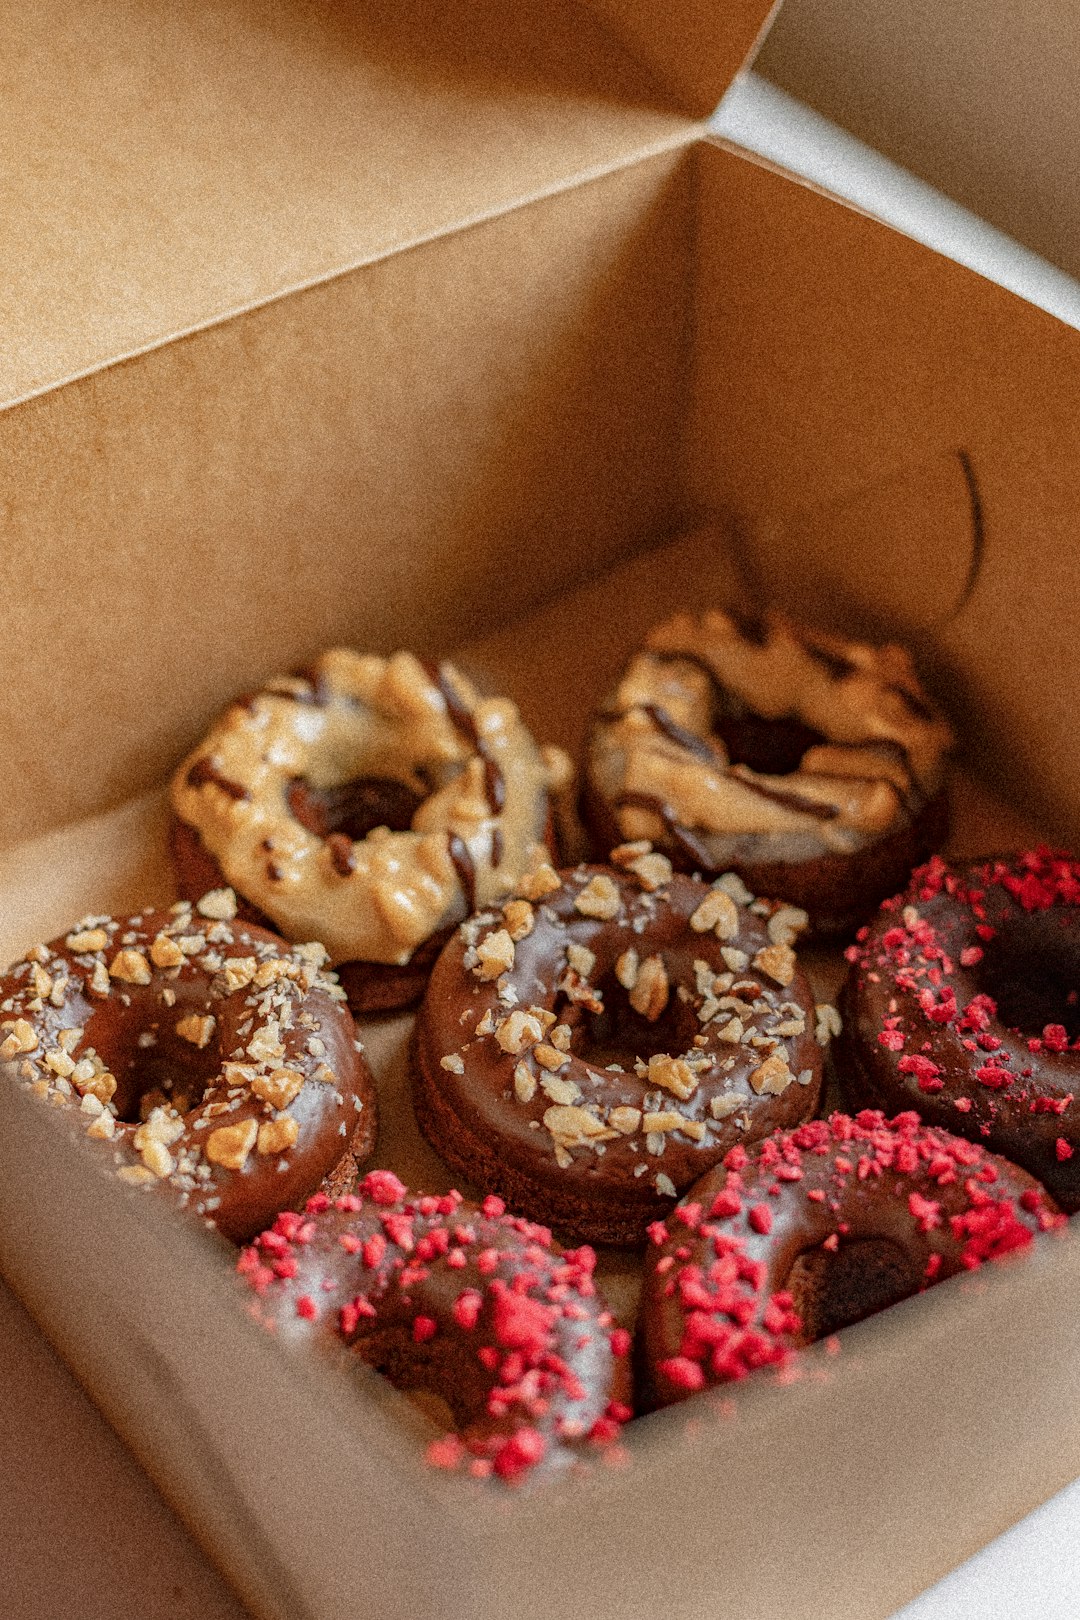 brown and pink donuts in box